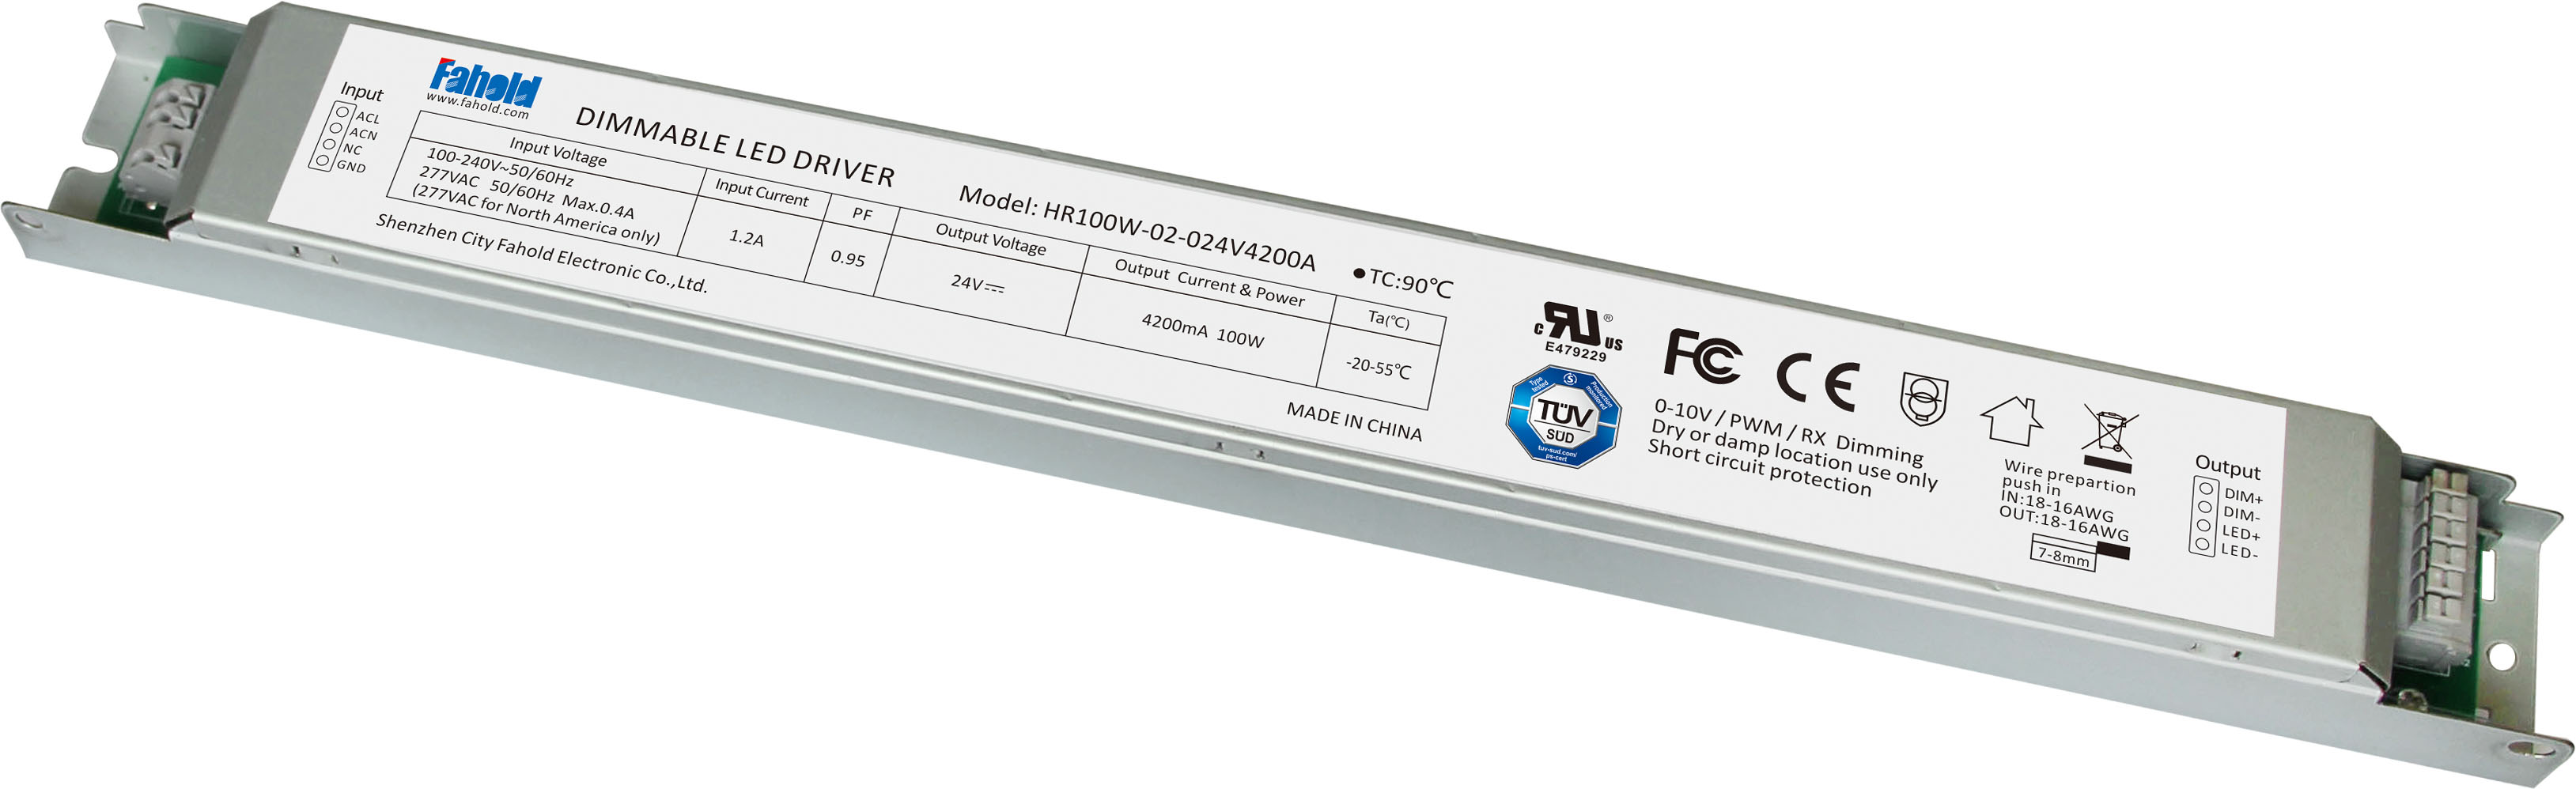 Constant Voltage 100W LED Drivers for LED Linear Lights UL TUV Certified